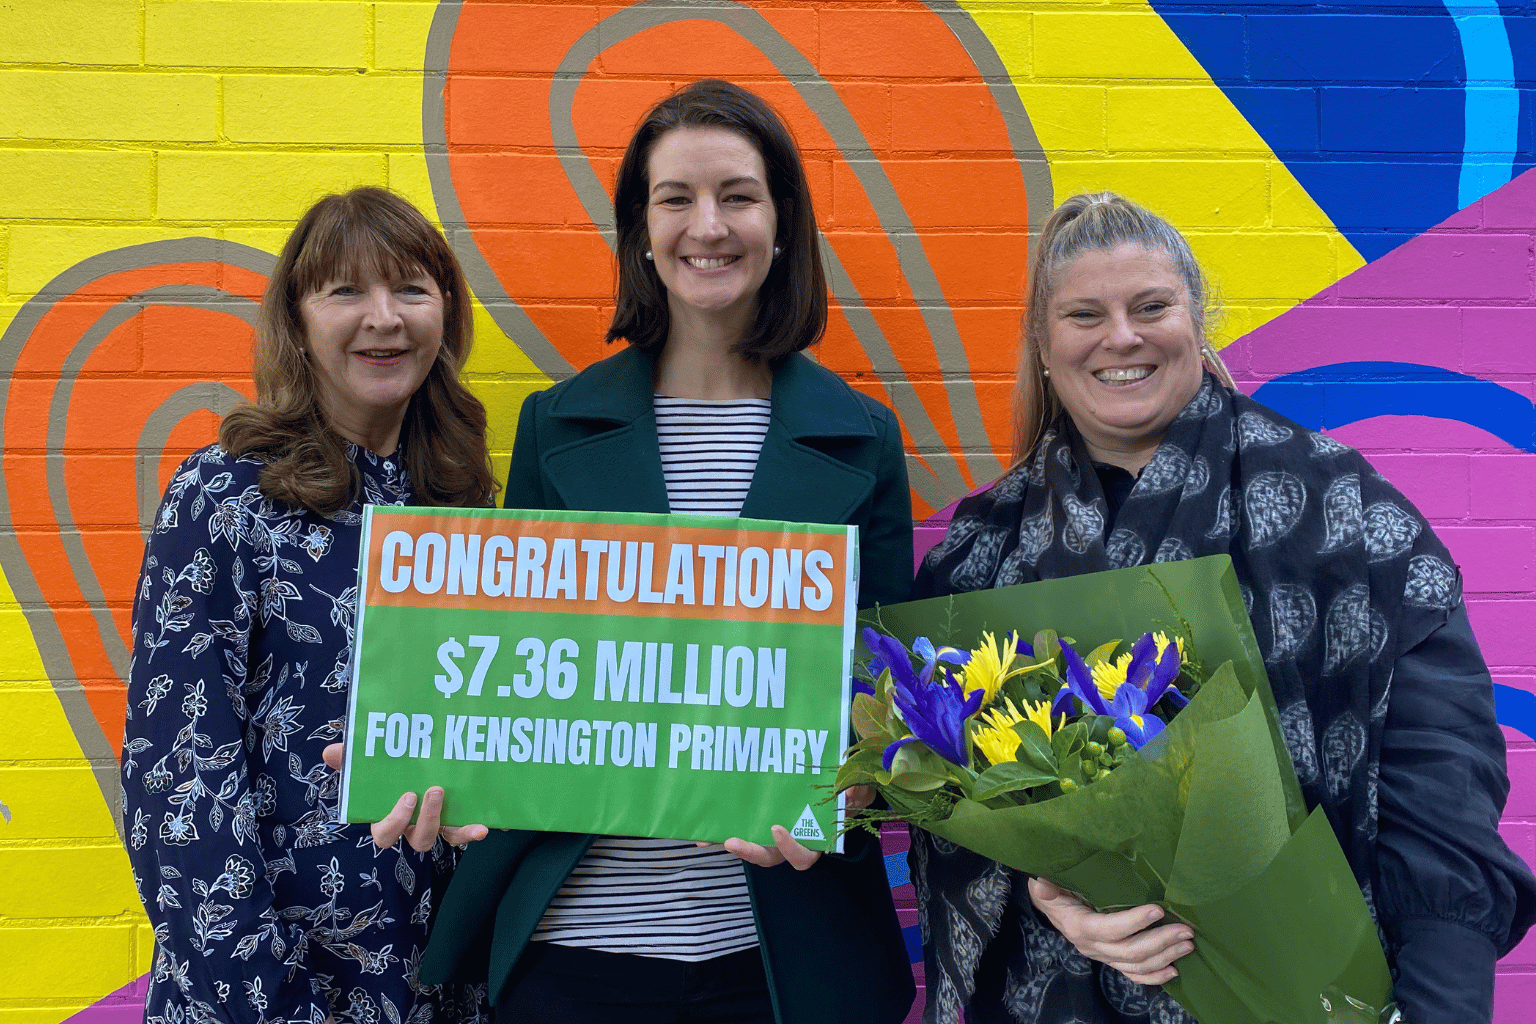 3 woman smiling to camera. One is holding a bunch of flowers and another is holding a sign that says: Congratulations $7.36 million for Kensington Primary